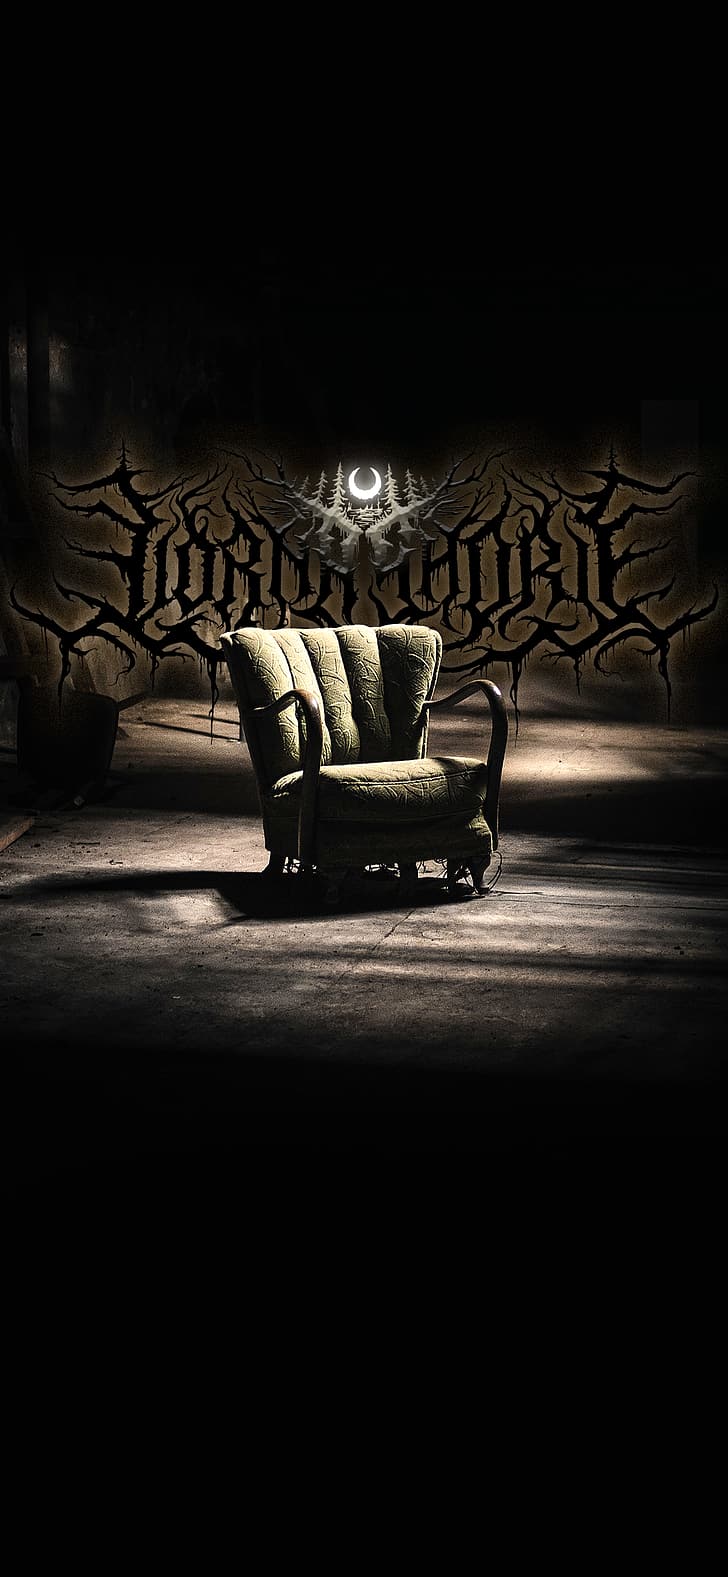 Lorna Shore, deathcore, abandoned, chair